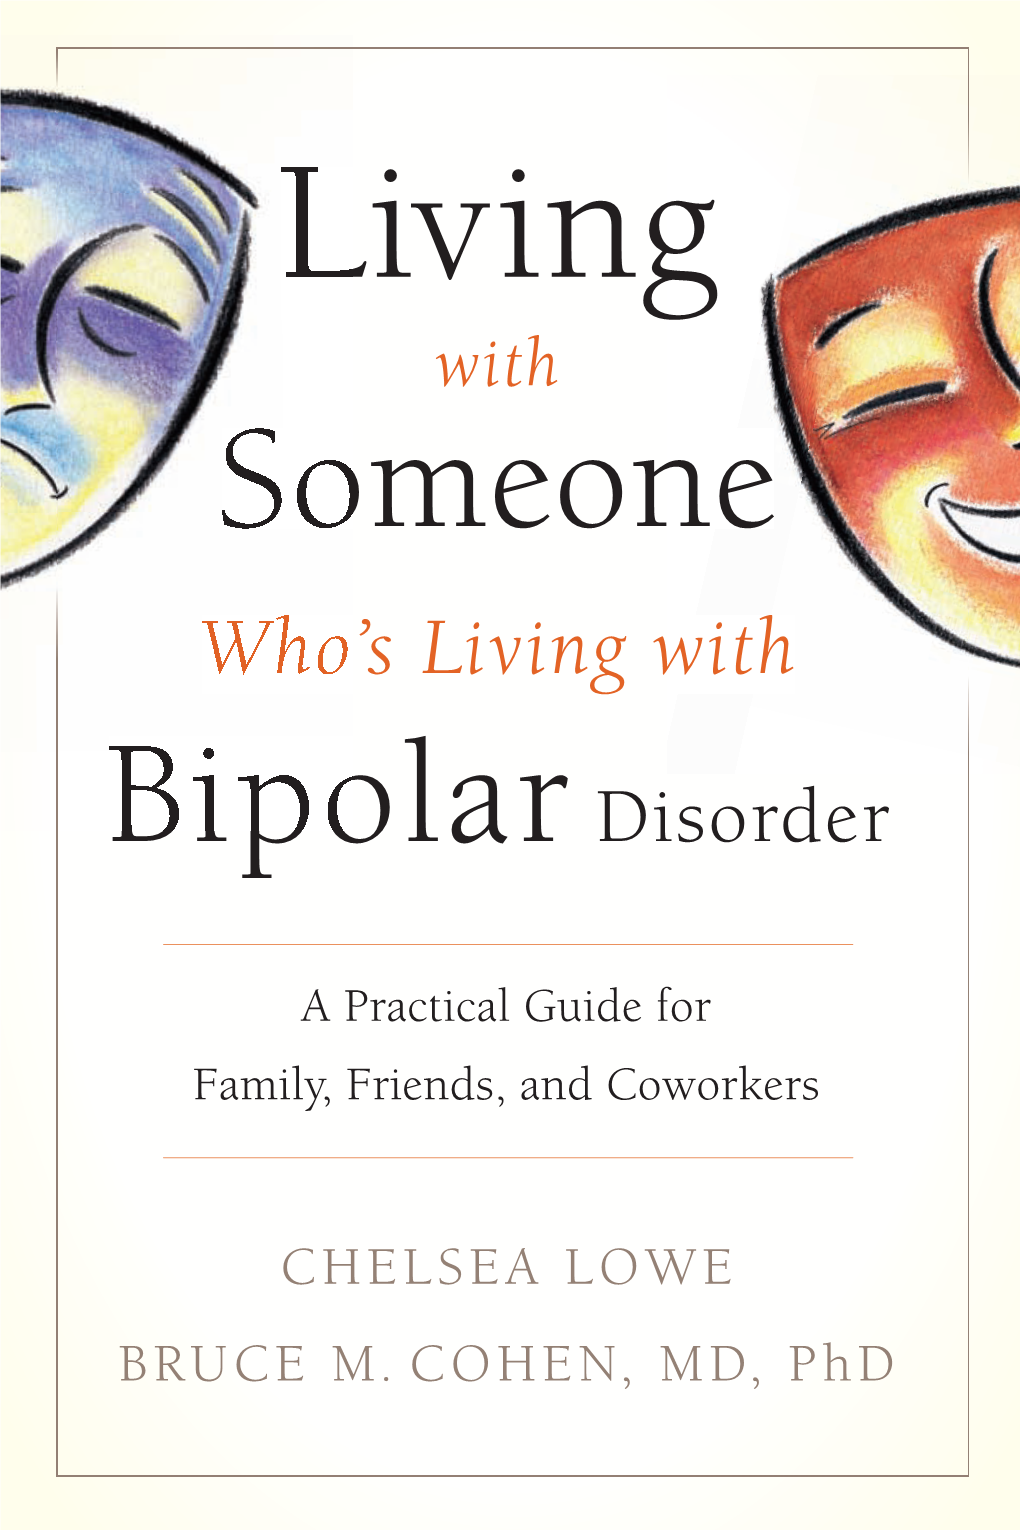 Living with Someone Who's Living with Bipolar Disorder : a Practical Guide for Family, Friends, and Coworkers / Chelsea Lowe and Bruce M